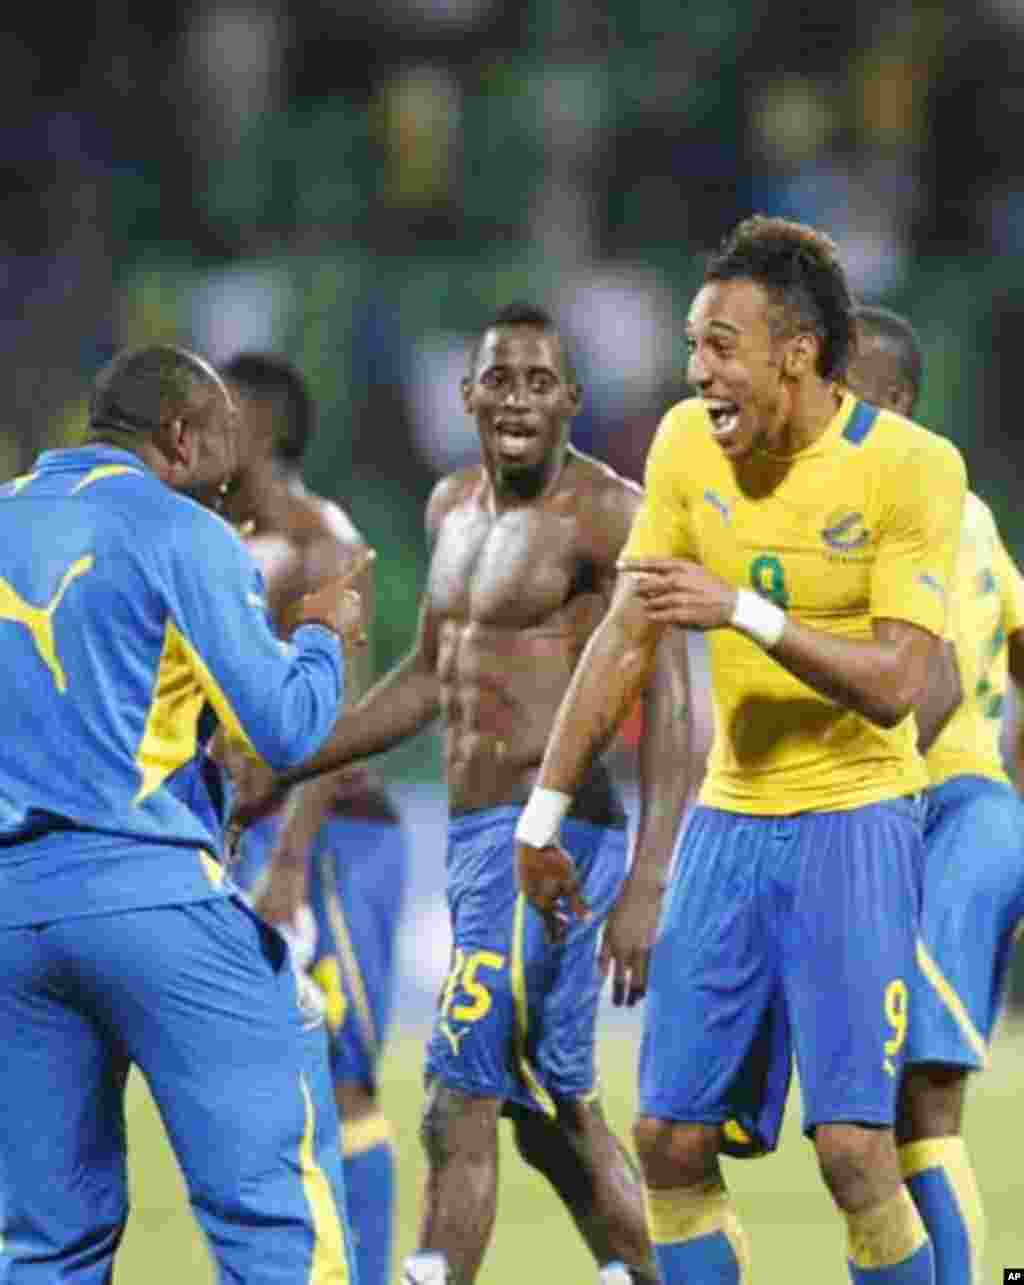 Gabon's Pierre Emerick Aubameyang (9) celebrates with teammates after they won their African Nations Cup Group C soccer match against Tunisia at Franceville Stadium in Gabon January 31, 2012.